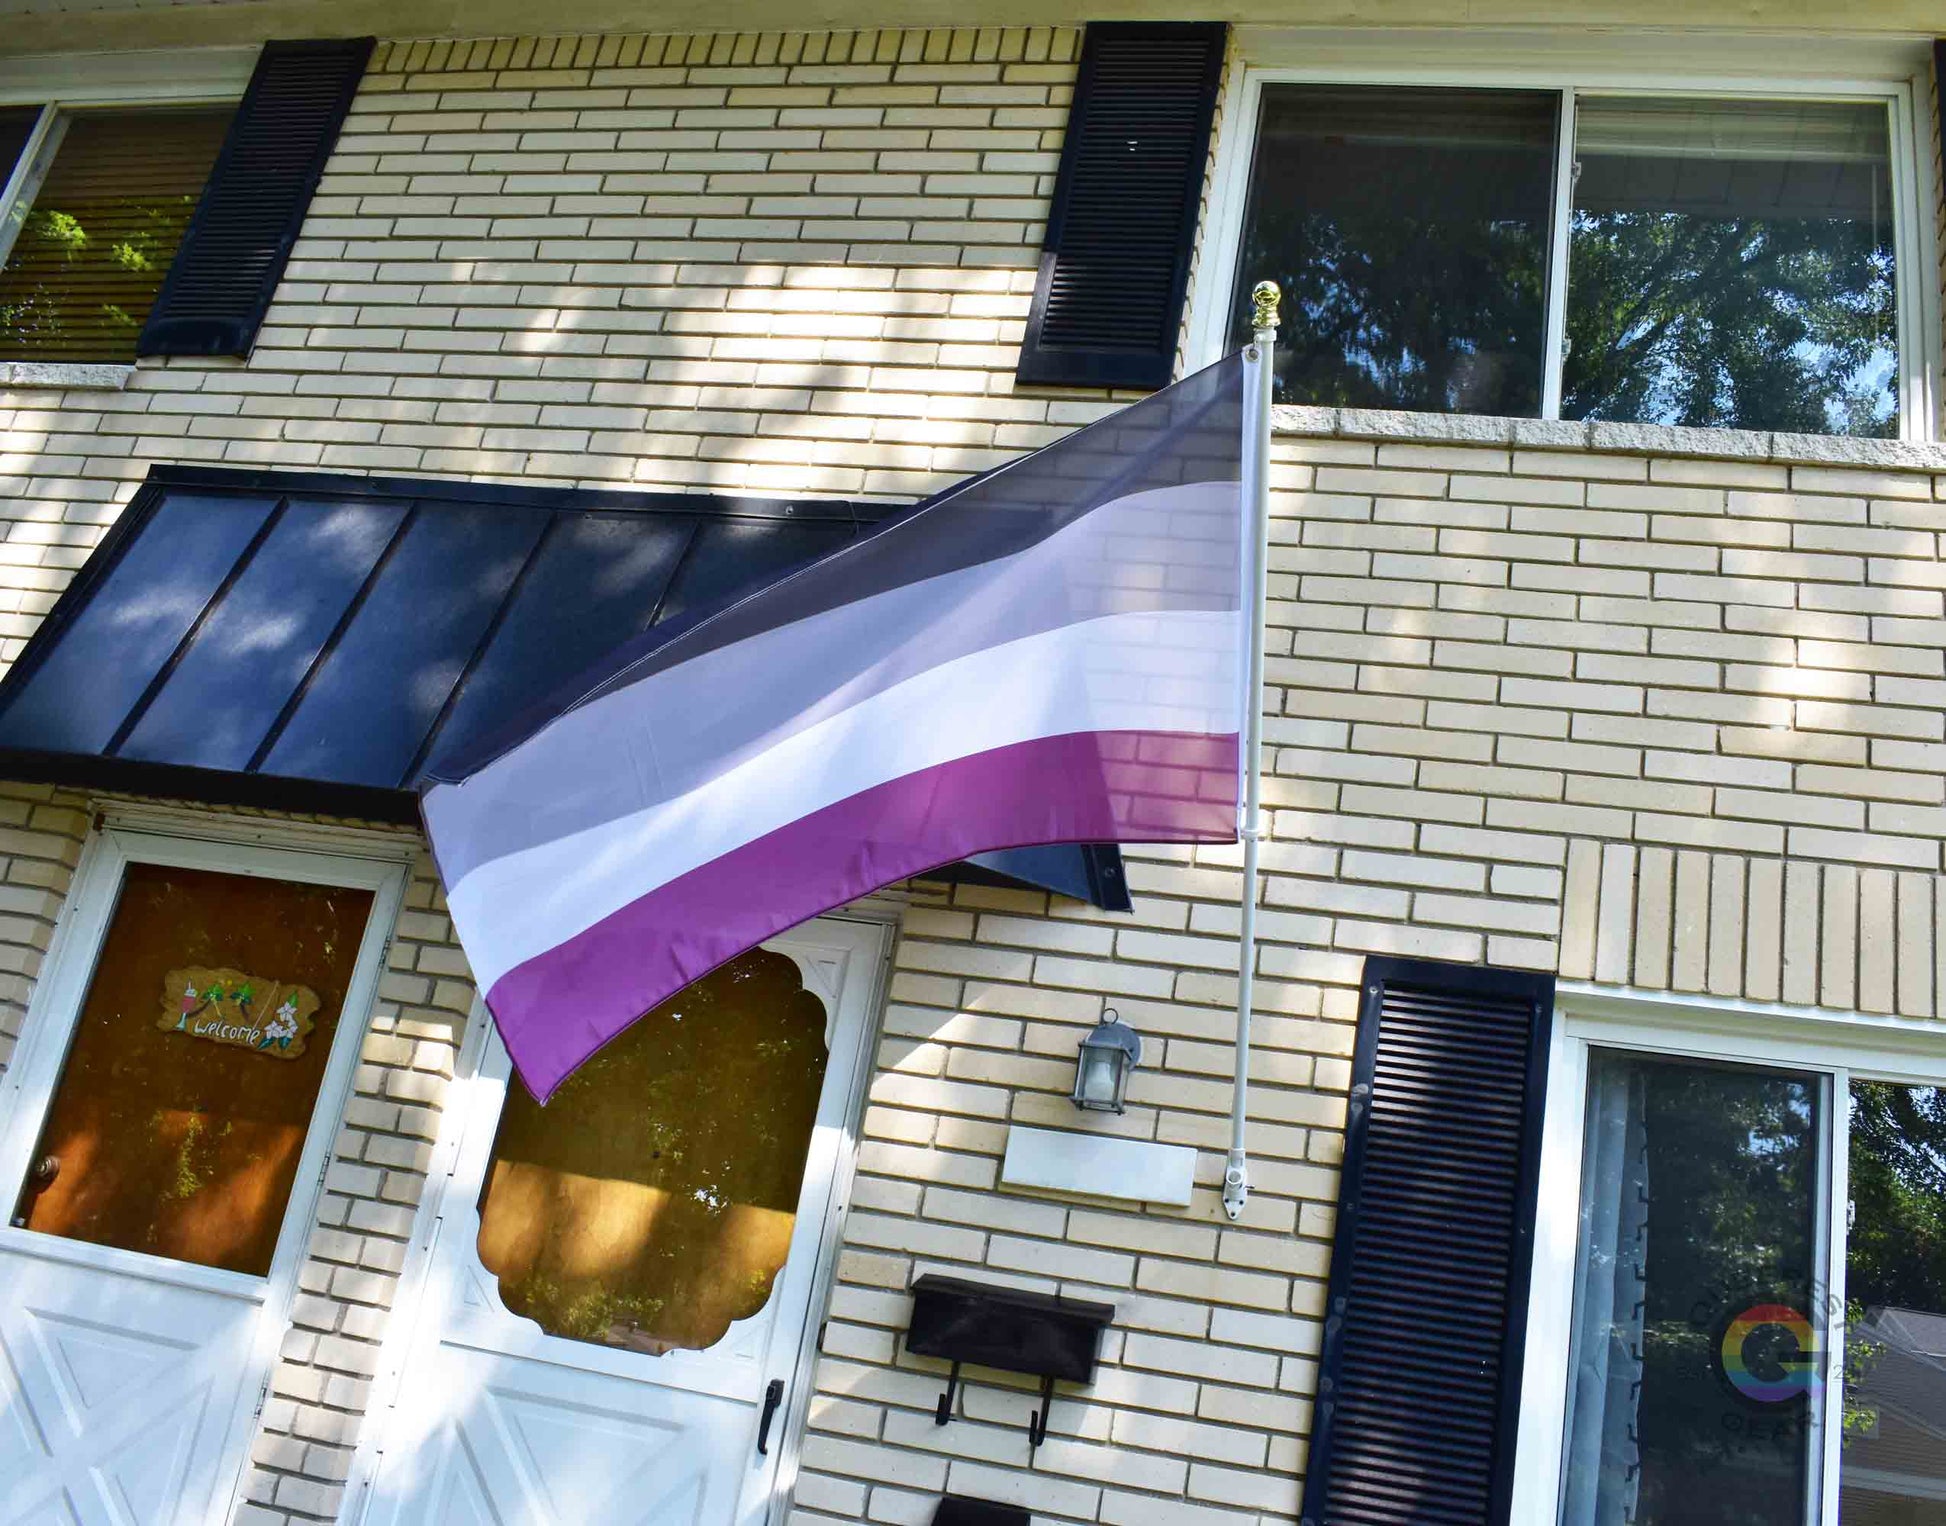 3’x5’ asexual pride flag hanging from a flagpole on the outside of a light brick house with dark shutters